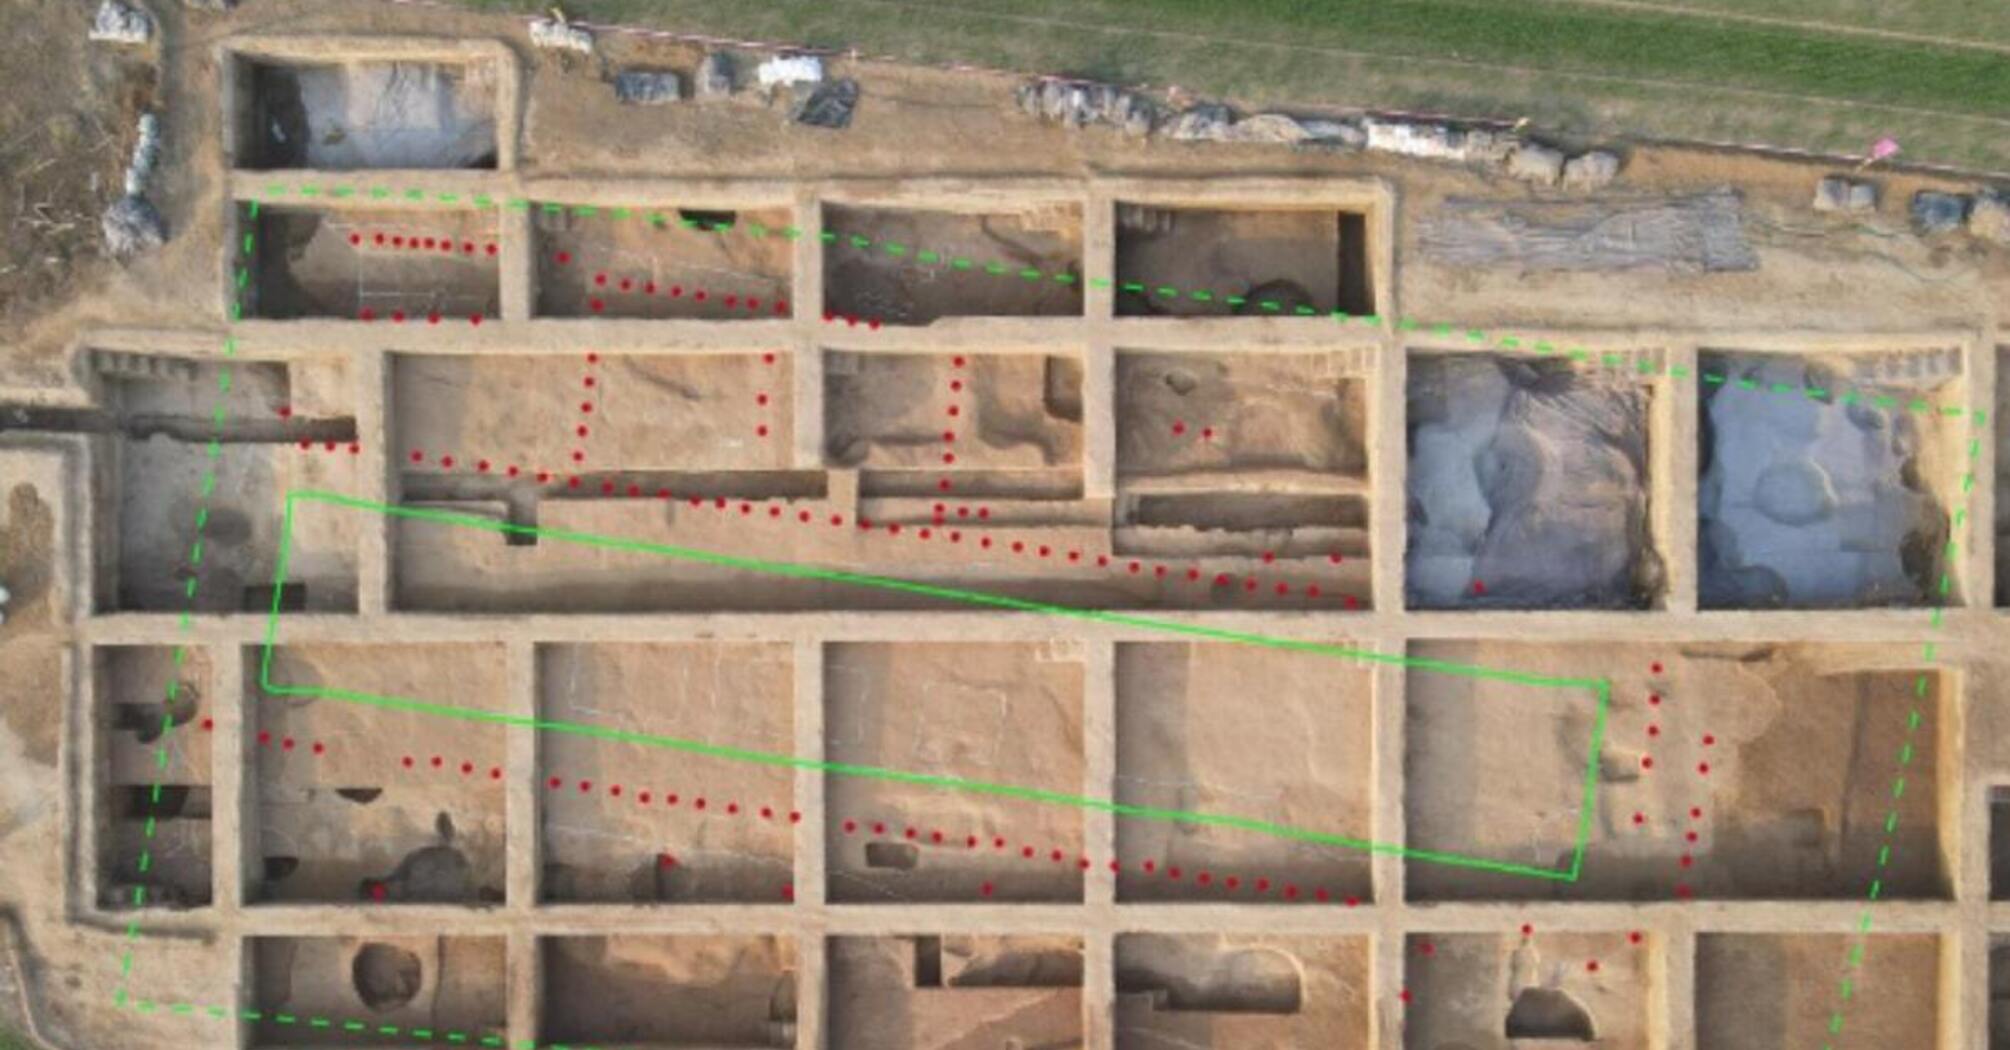 4000-year-old palace found in China